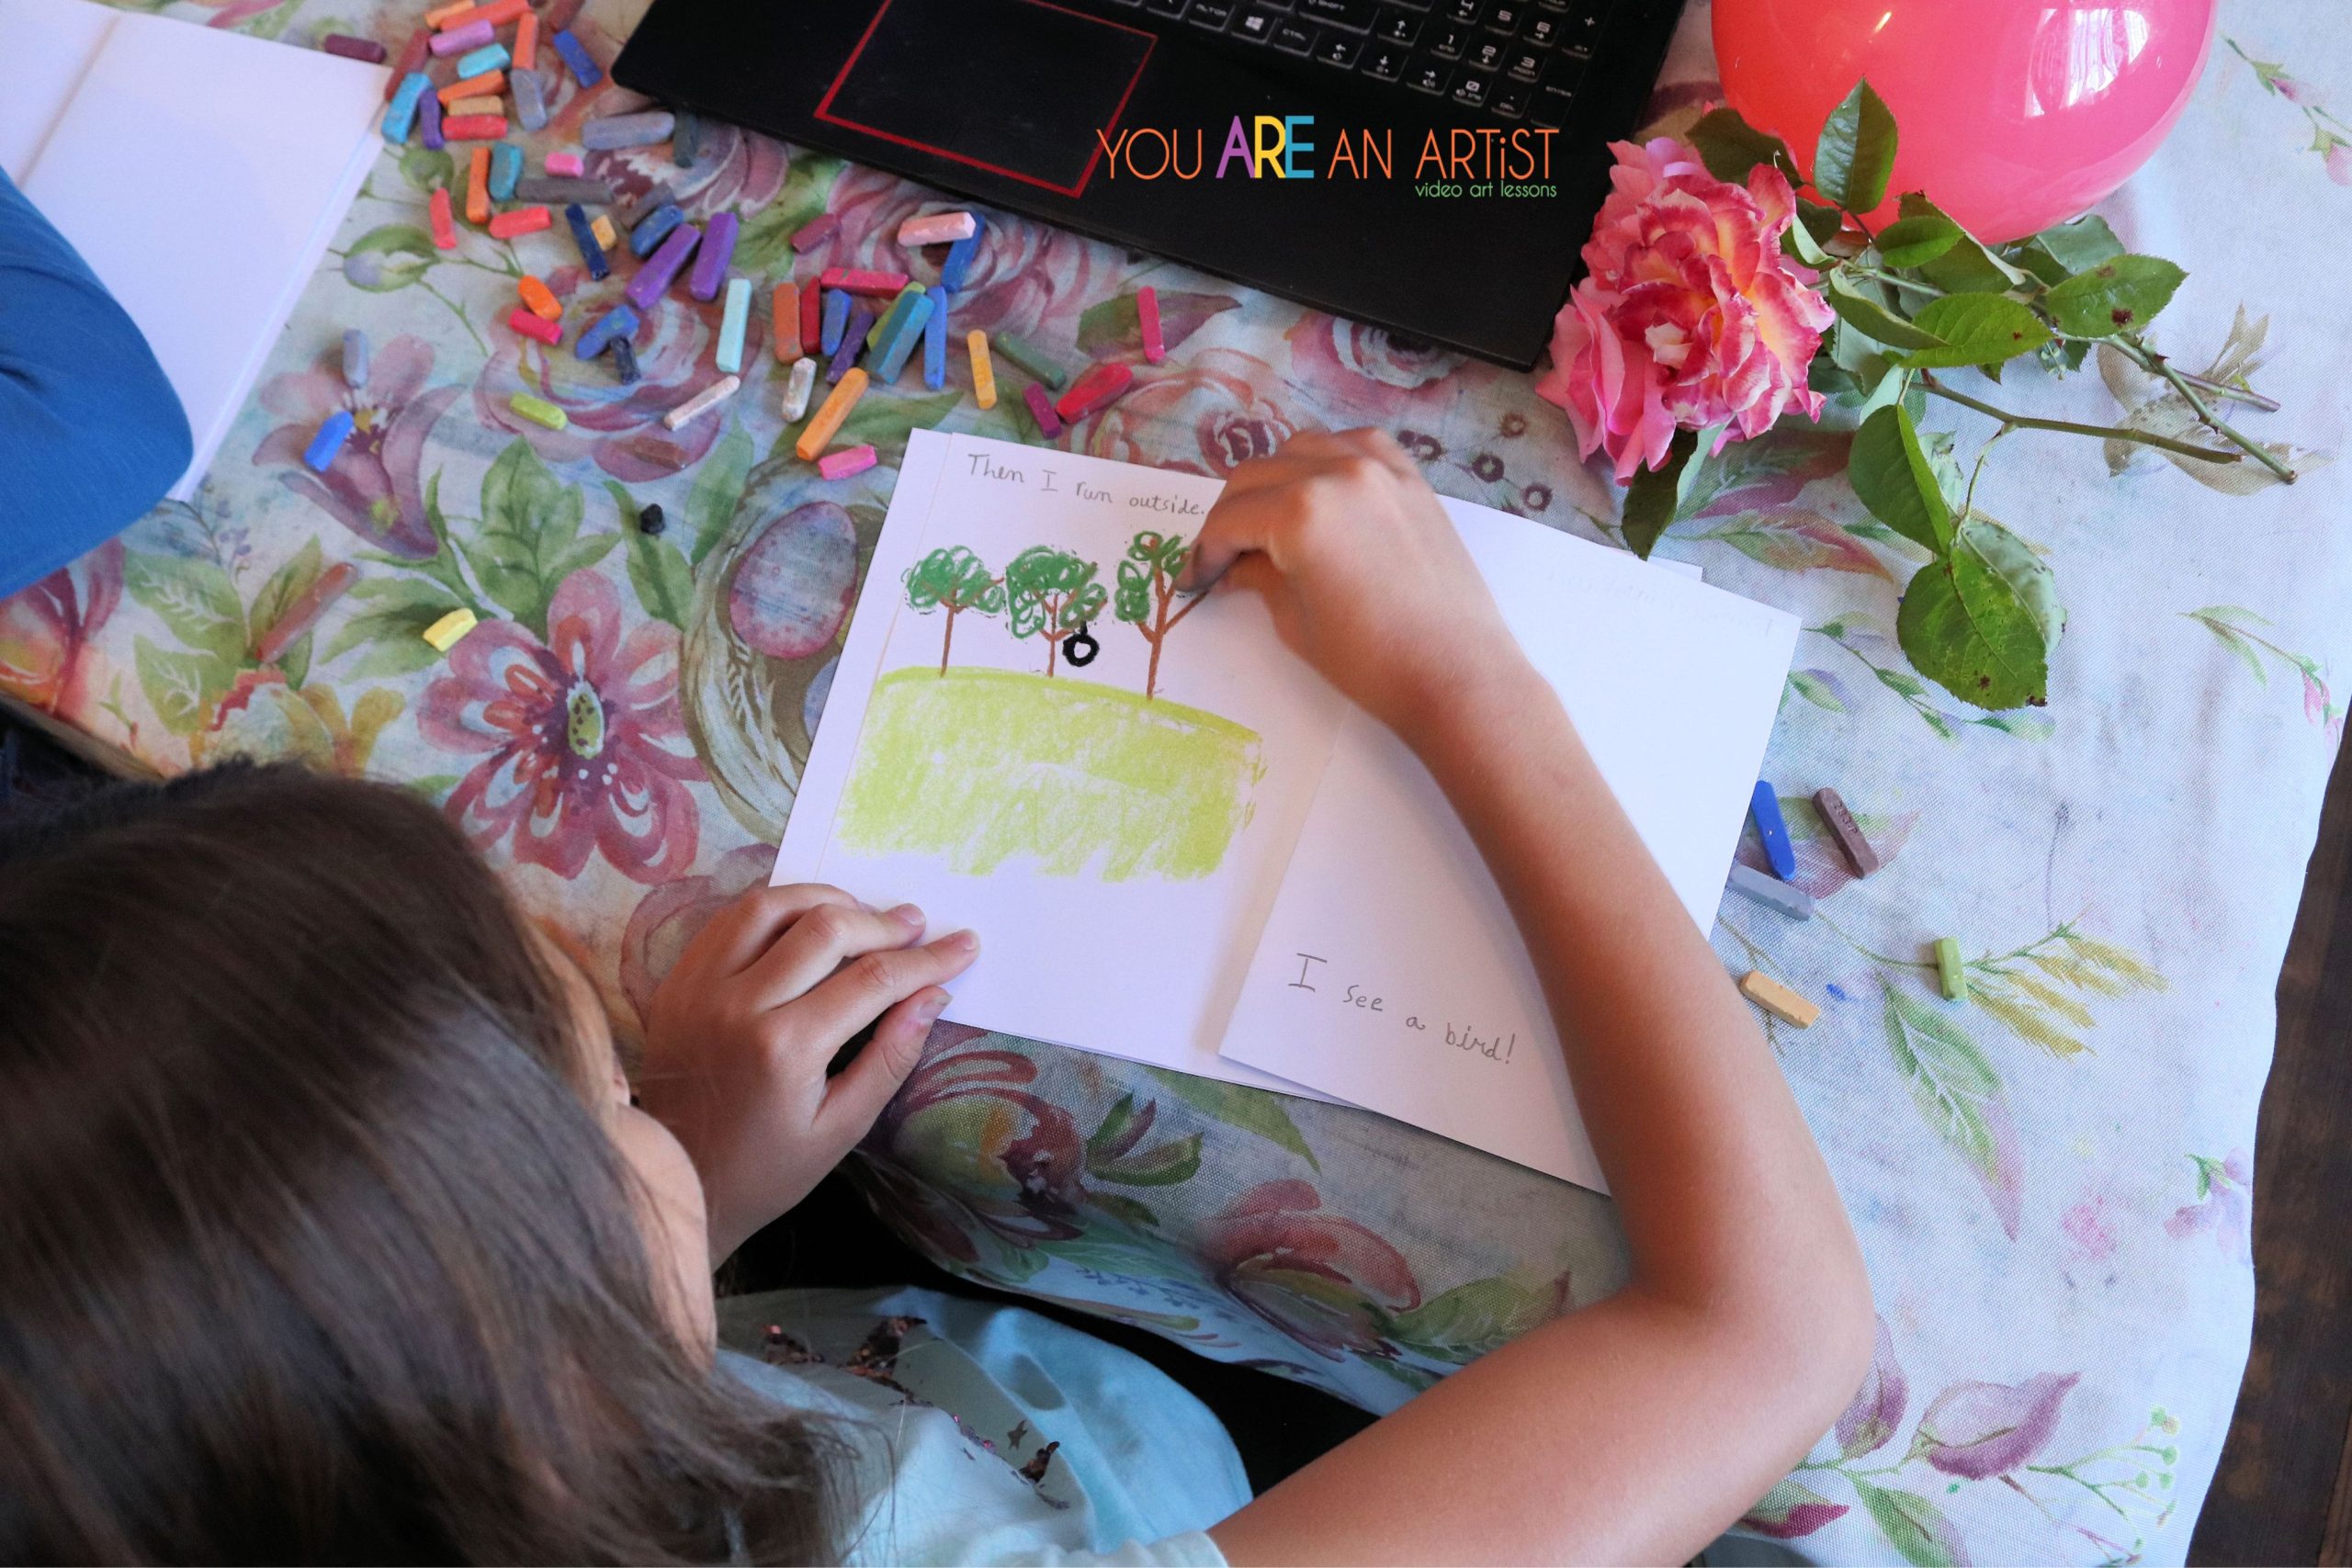 Learning to read with art embraces more than meets the eye. Let’s take a peek at these creative sight word activities for your homeschool. It's fun for the whole family!